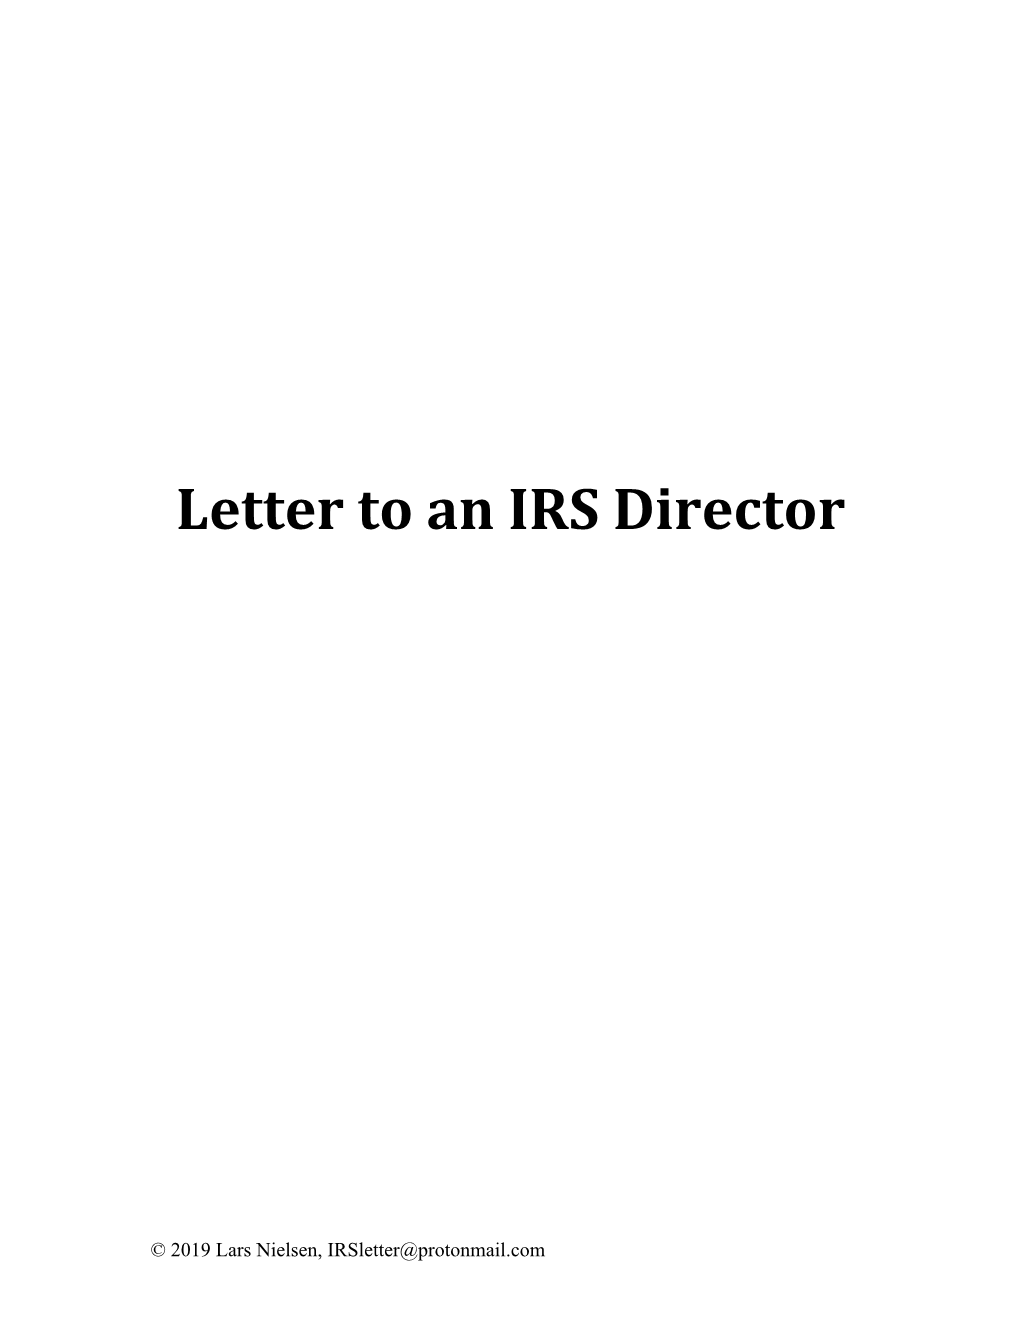 Letter to an IRS Director